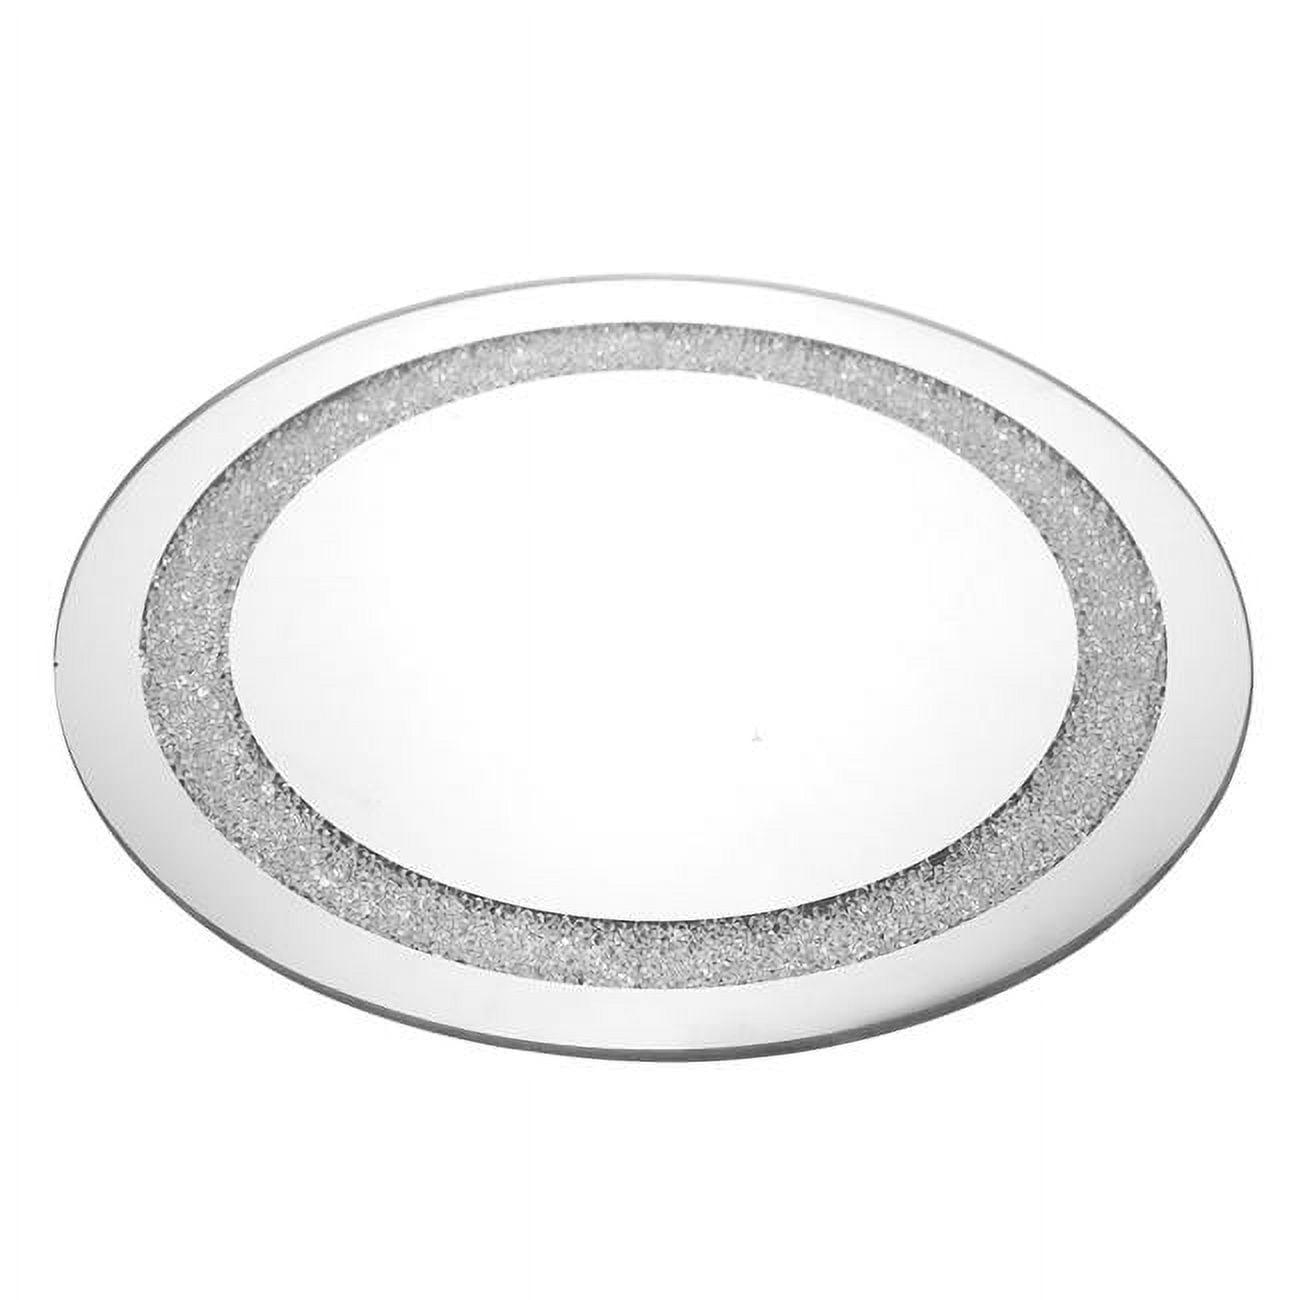 Shonfeld Crystal 55537 10.6 In. Mirror Tray Round With Diamonds